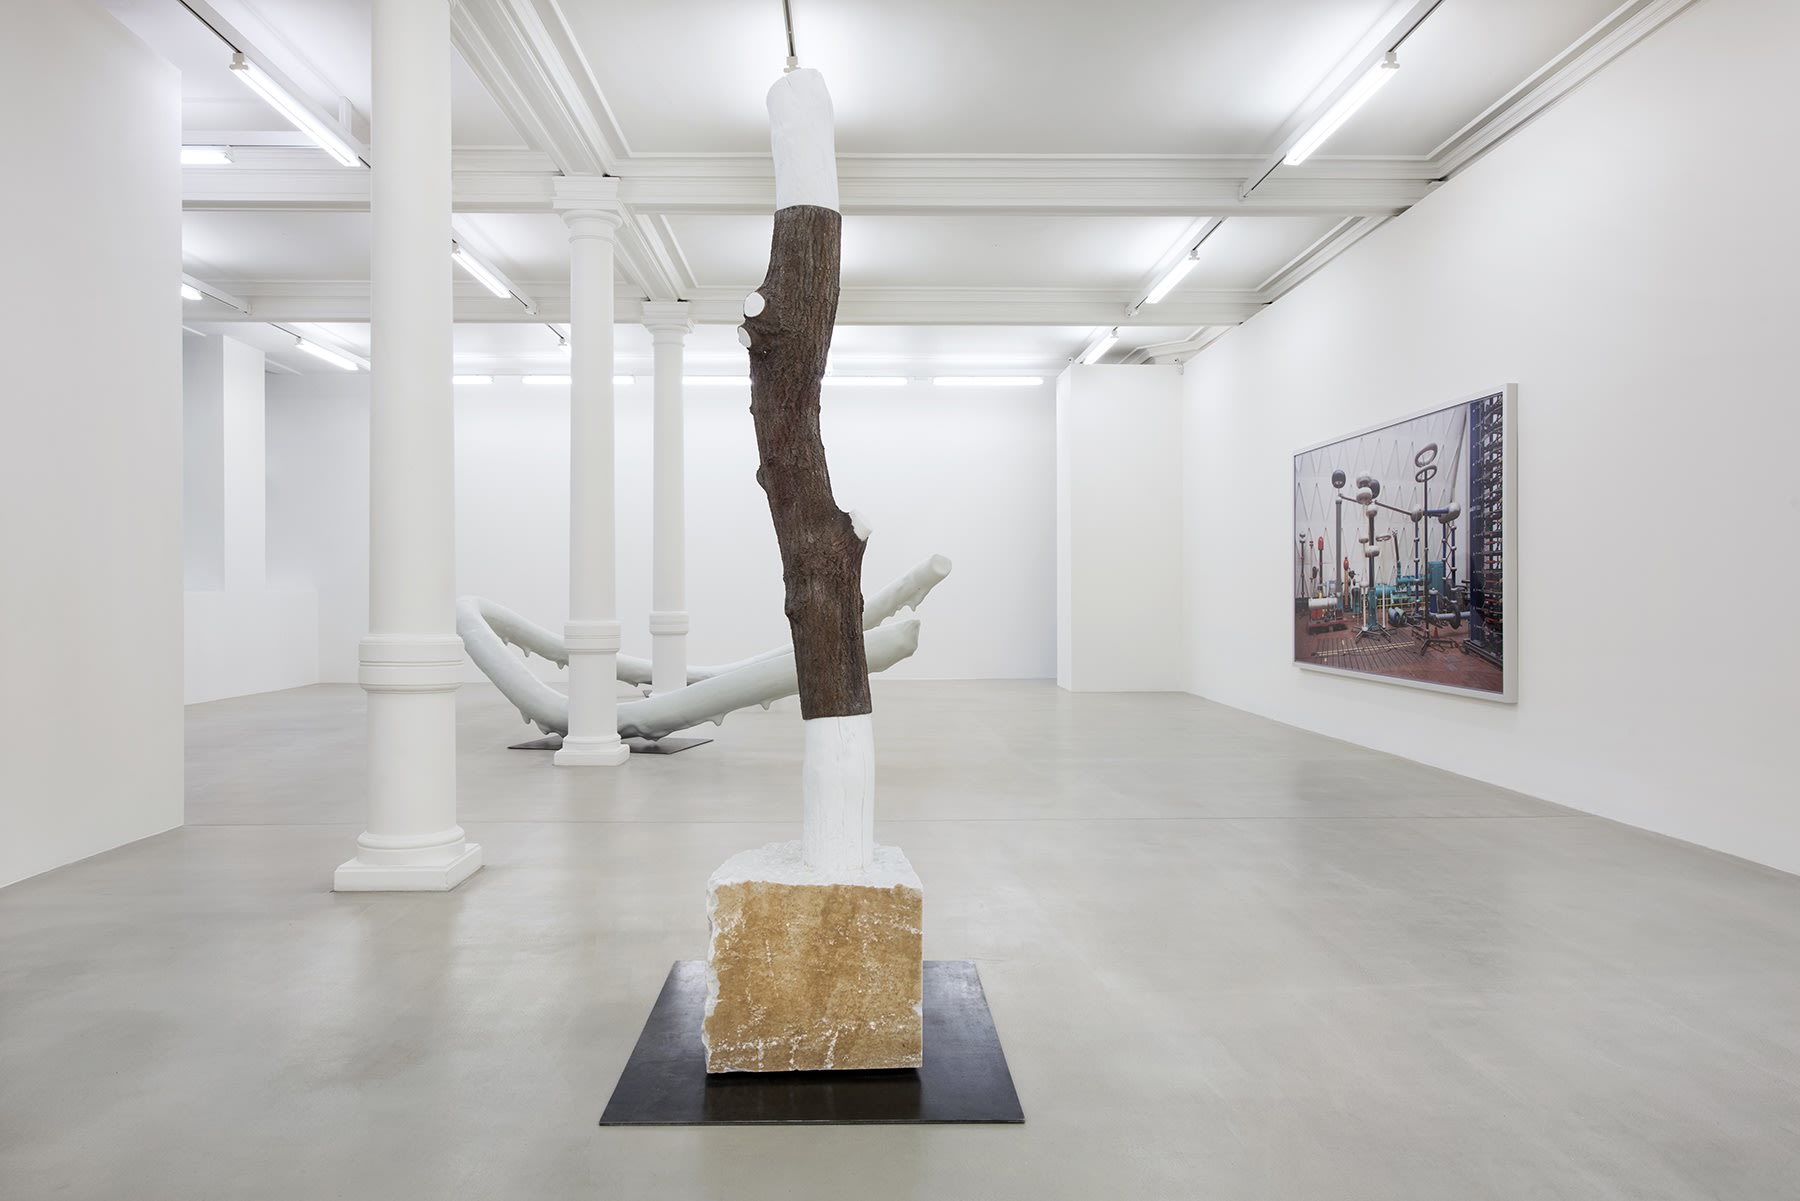 A sculpture of the cut section of a tree trunk sits in the center of the gallery.